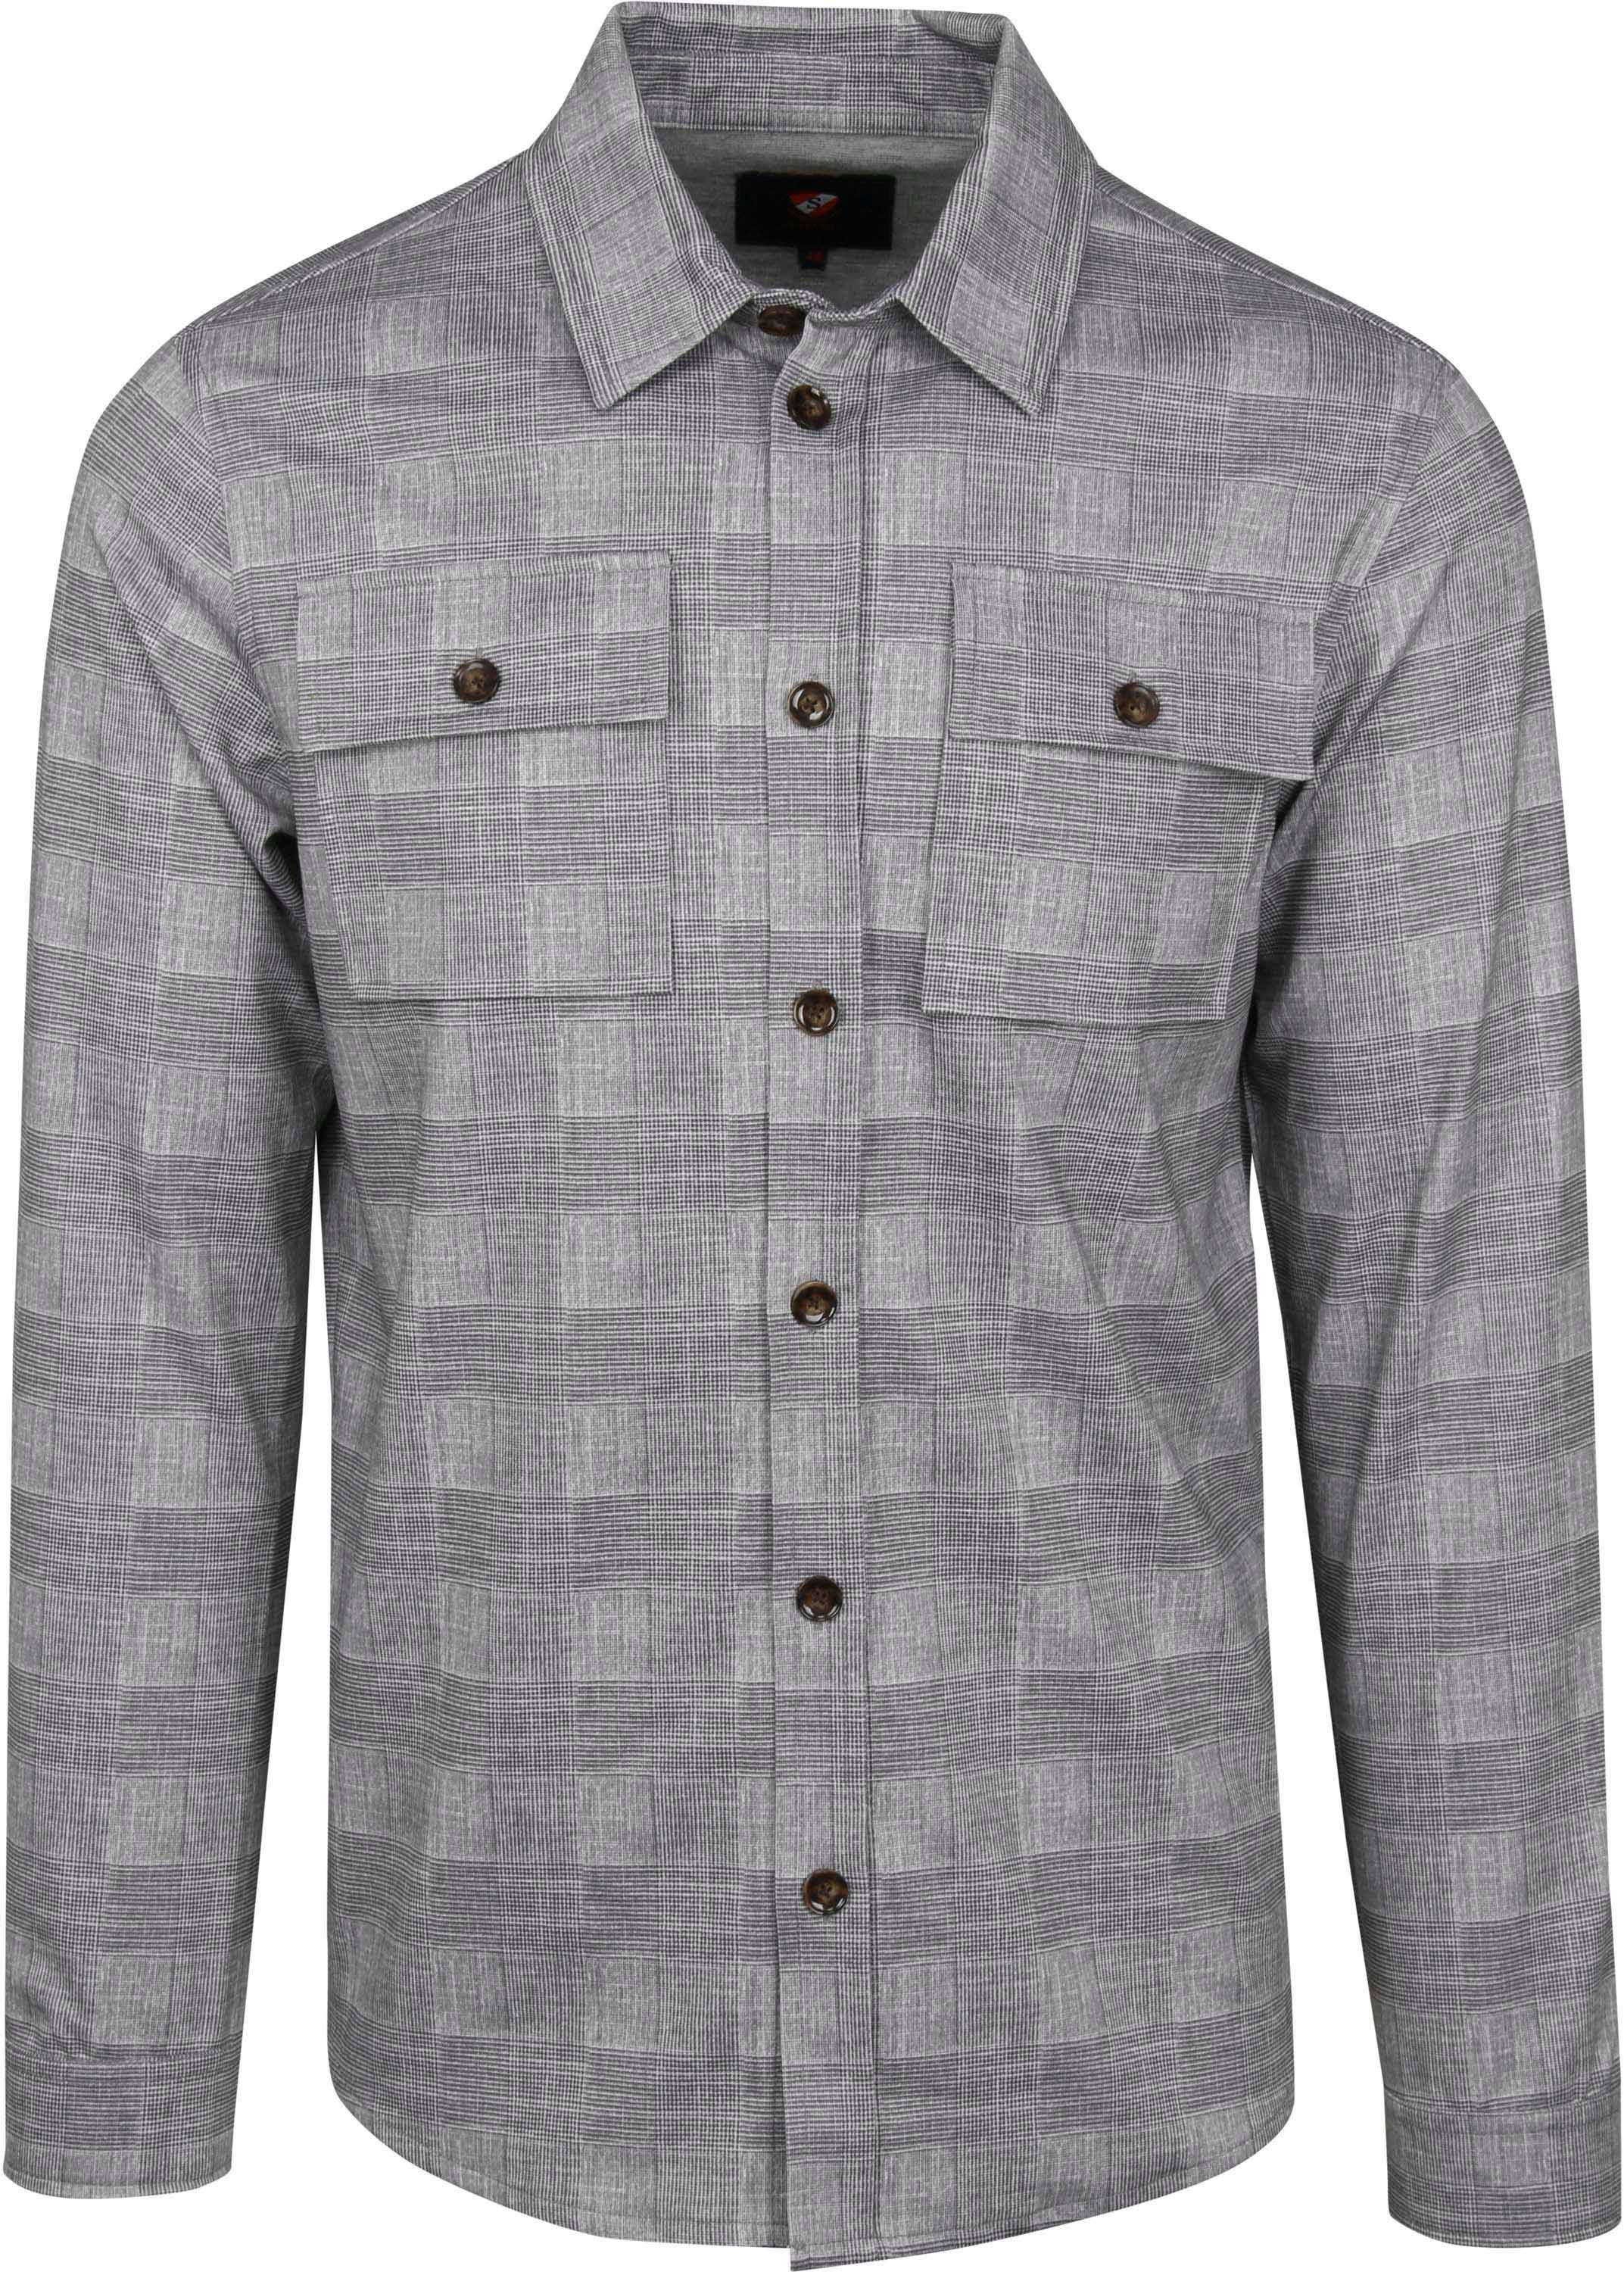 Suitable Liv Overshirt Checkered Gray Grey size 38-R